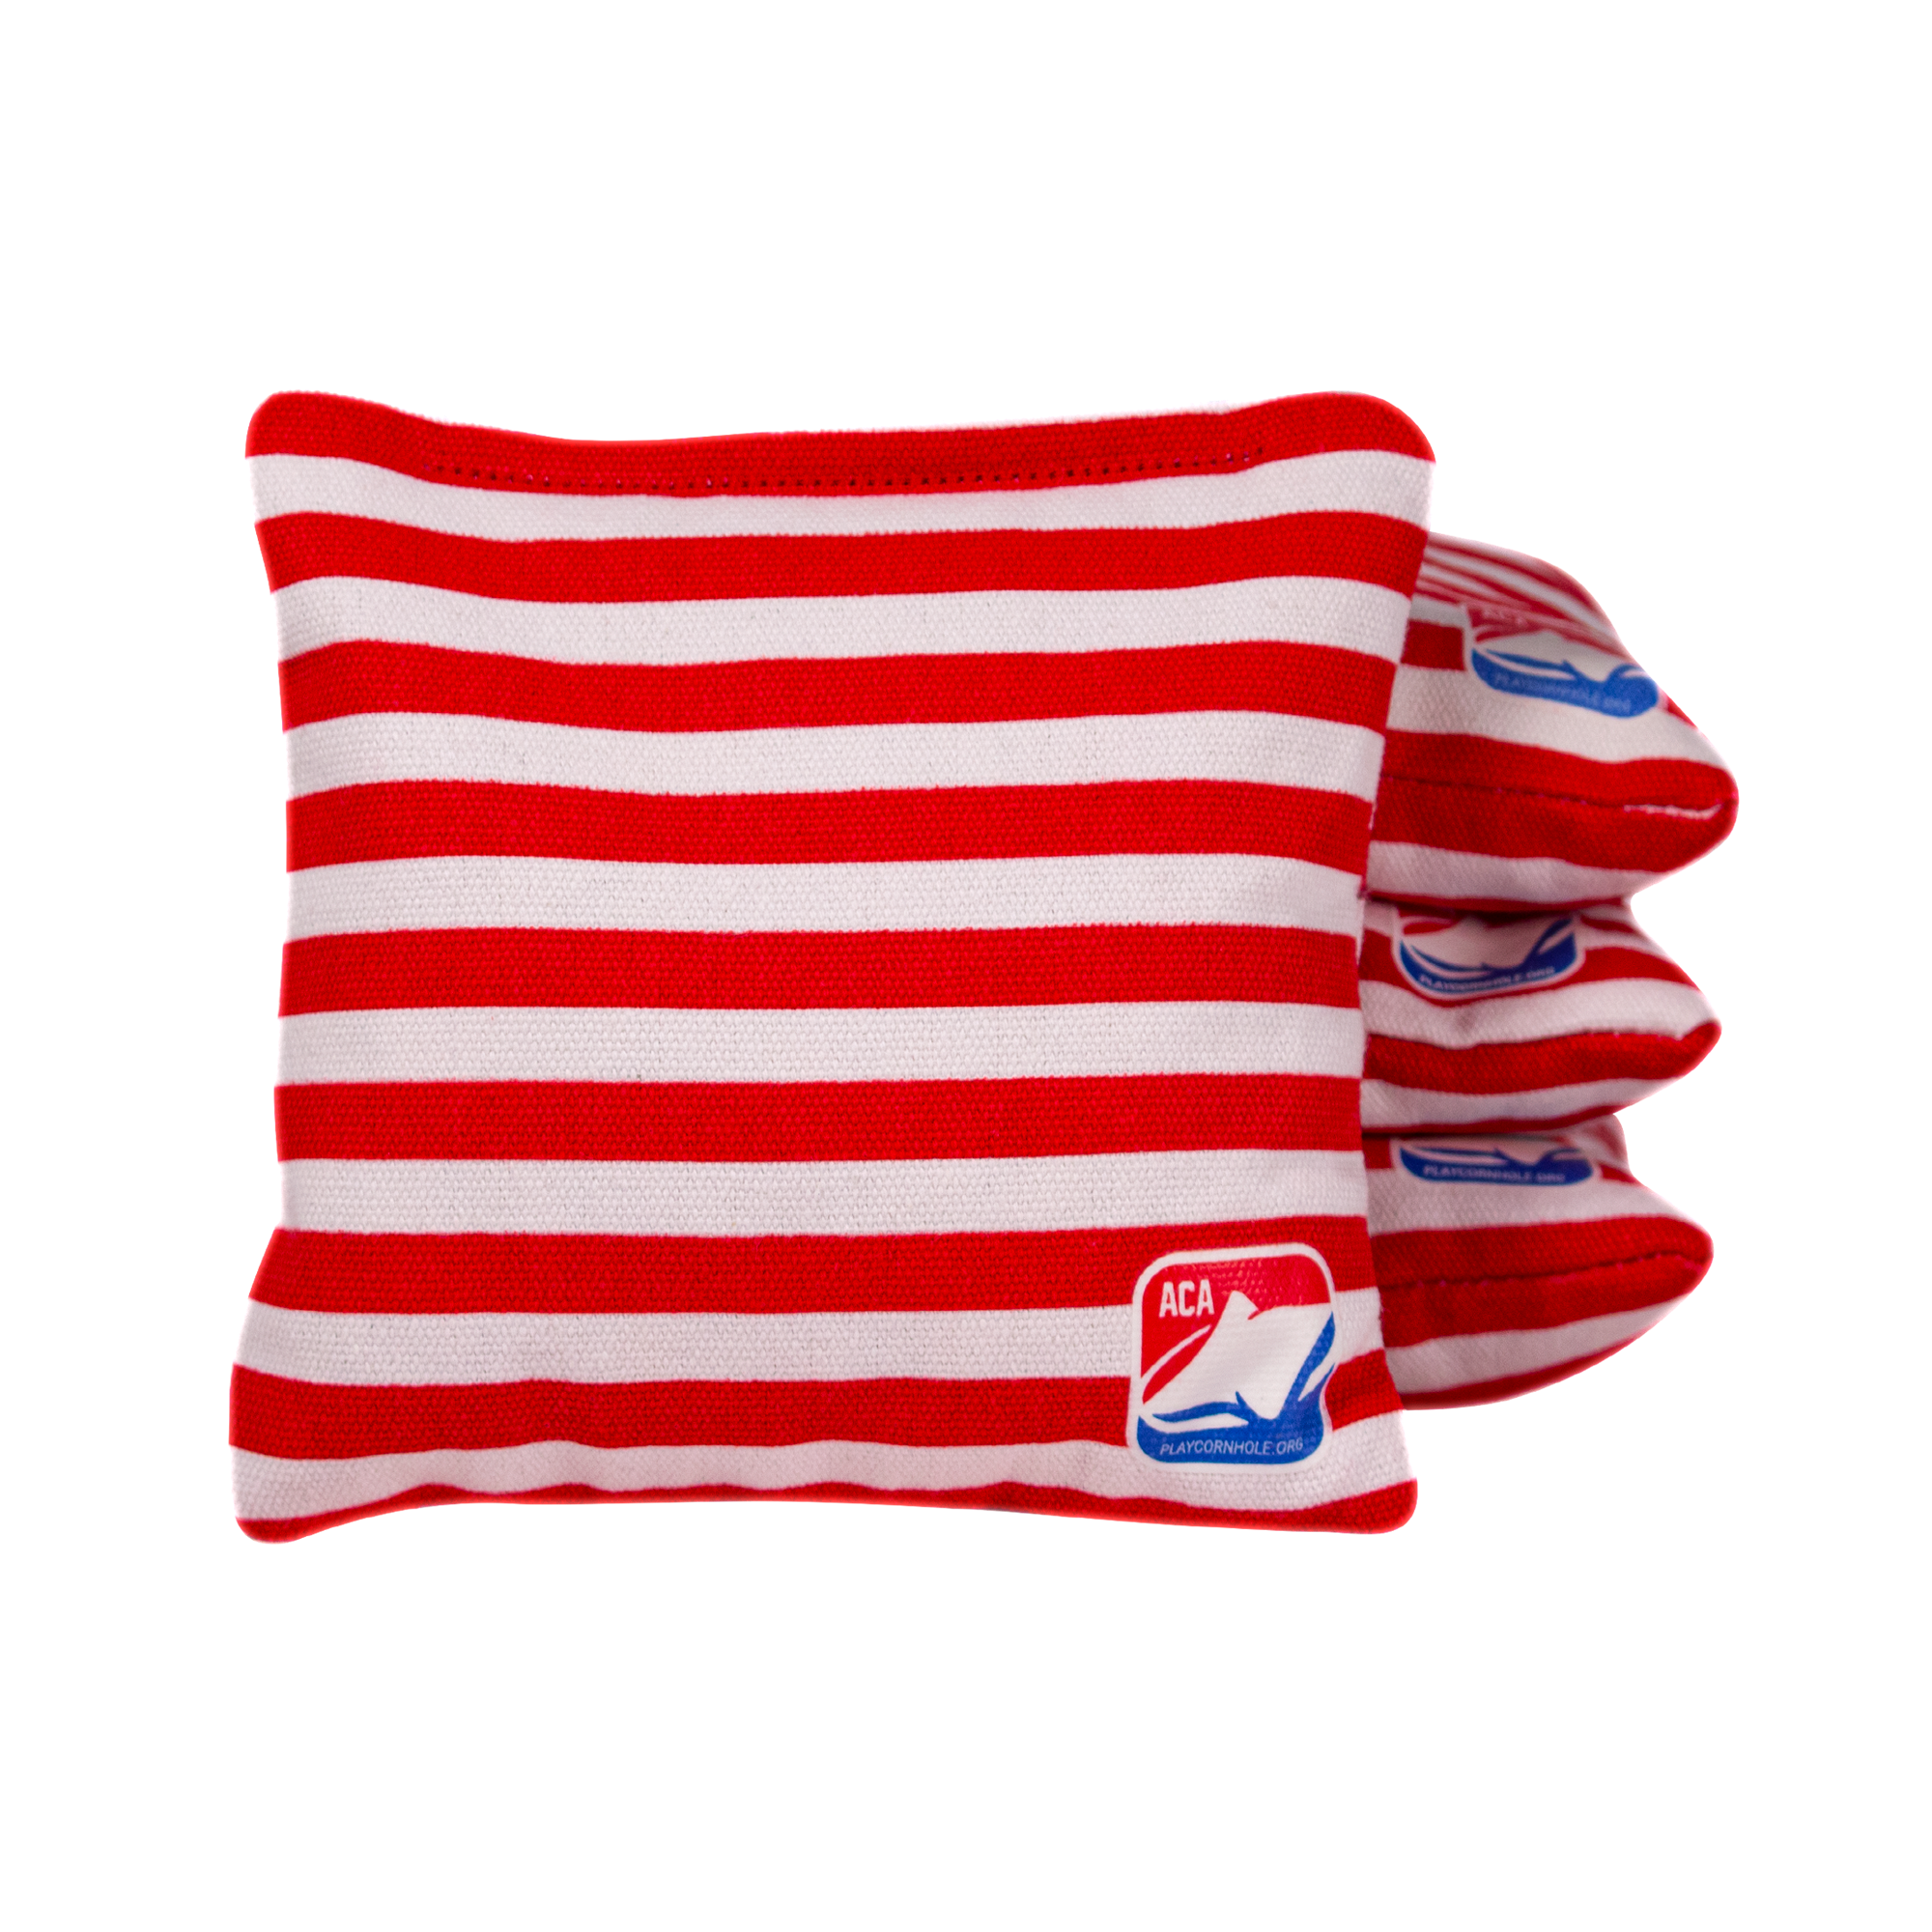 6-in Daily 66x Red & White Stripes Competition Regulation Cornhole Bags